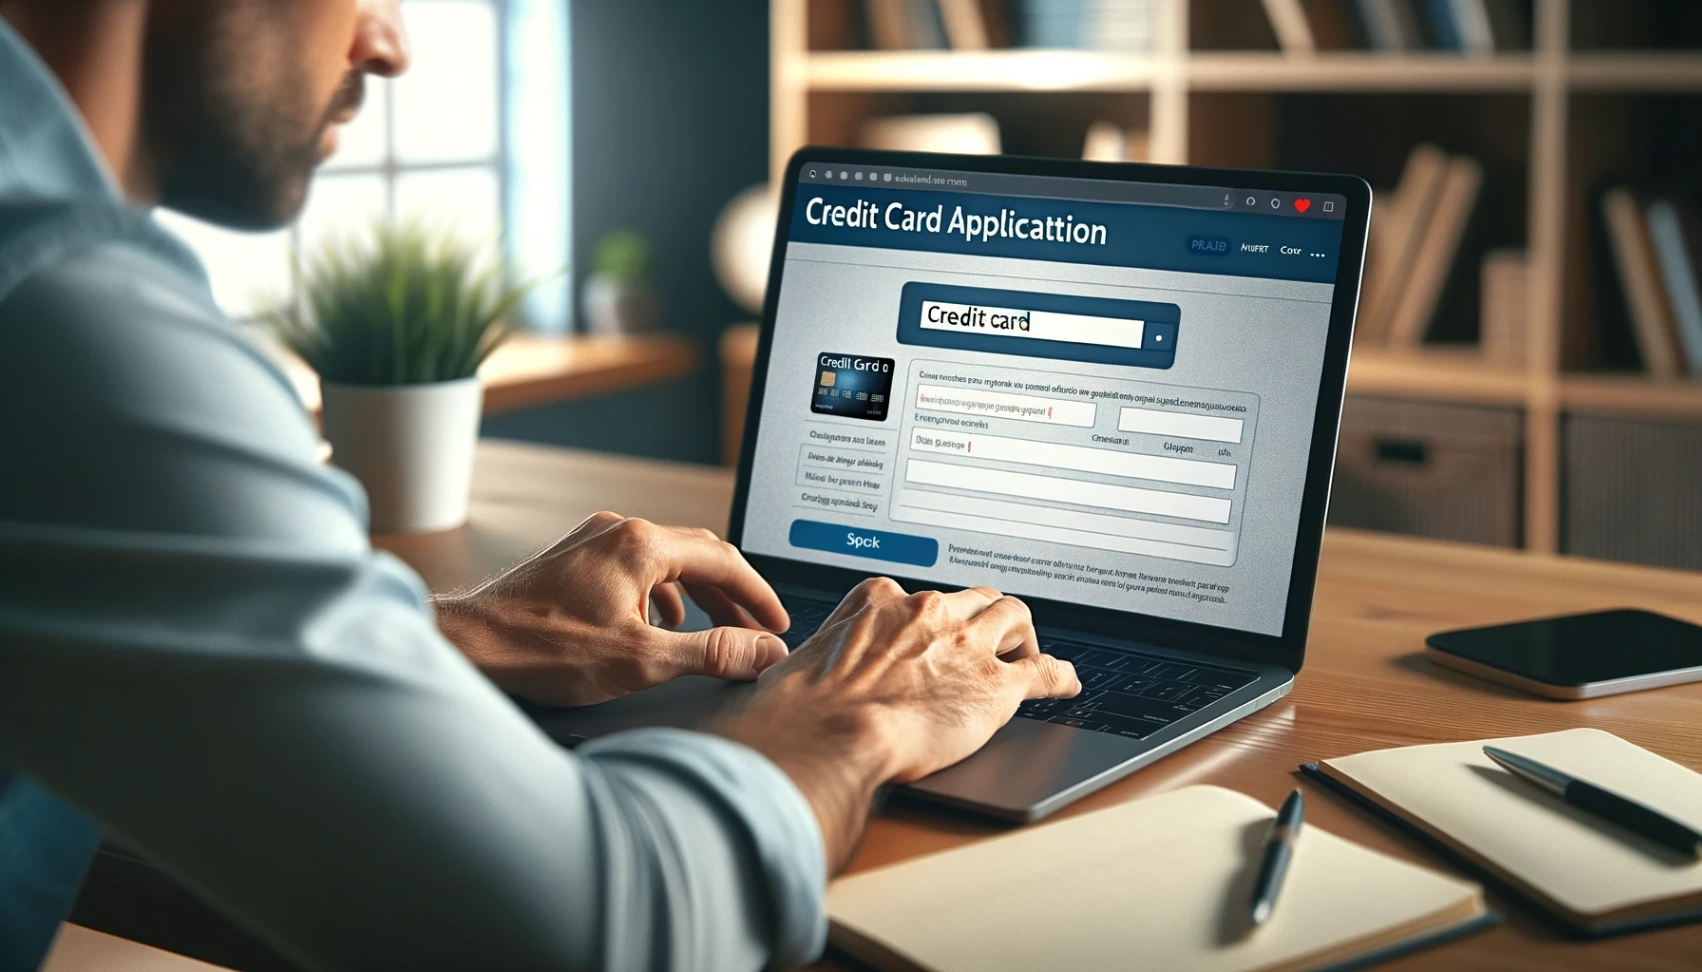 Capital One Credit Card - Learn How to Apply